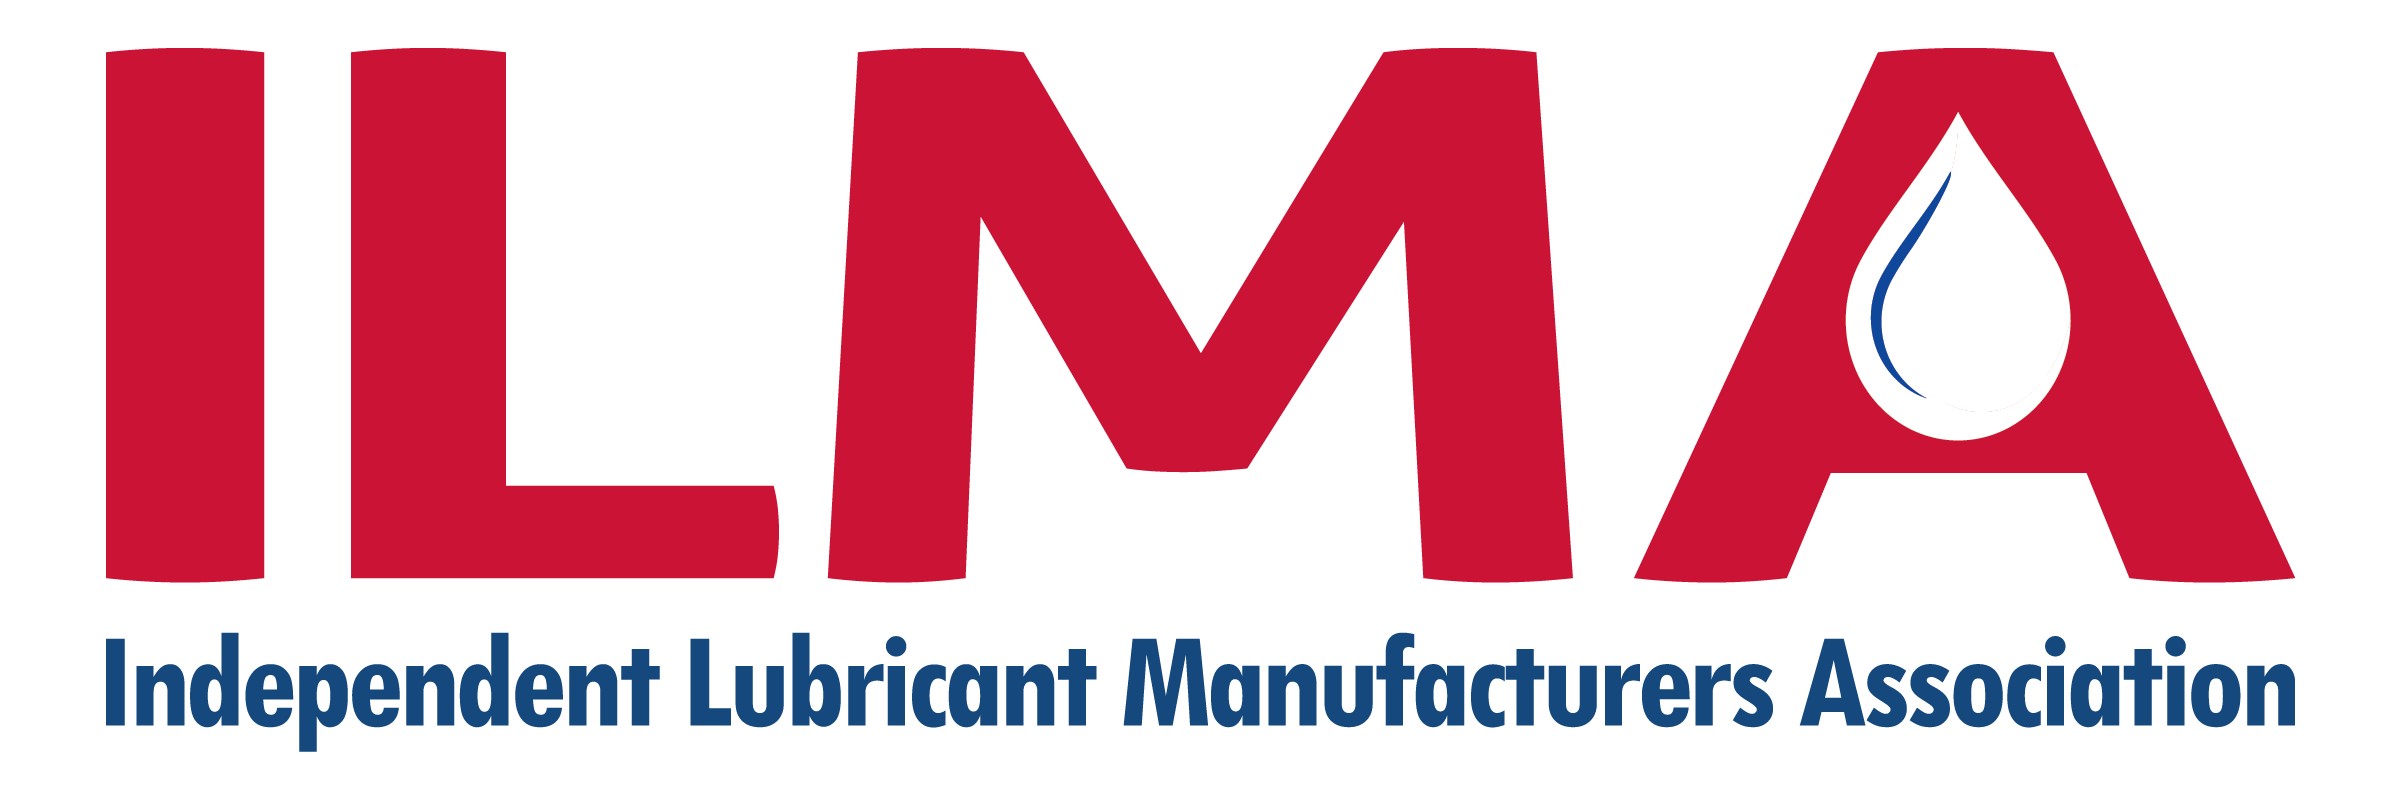 LSI Chemical Joins Independent Lubricant Manufacturers Association | THE SHOP